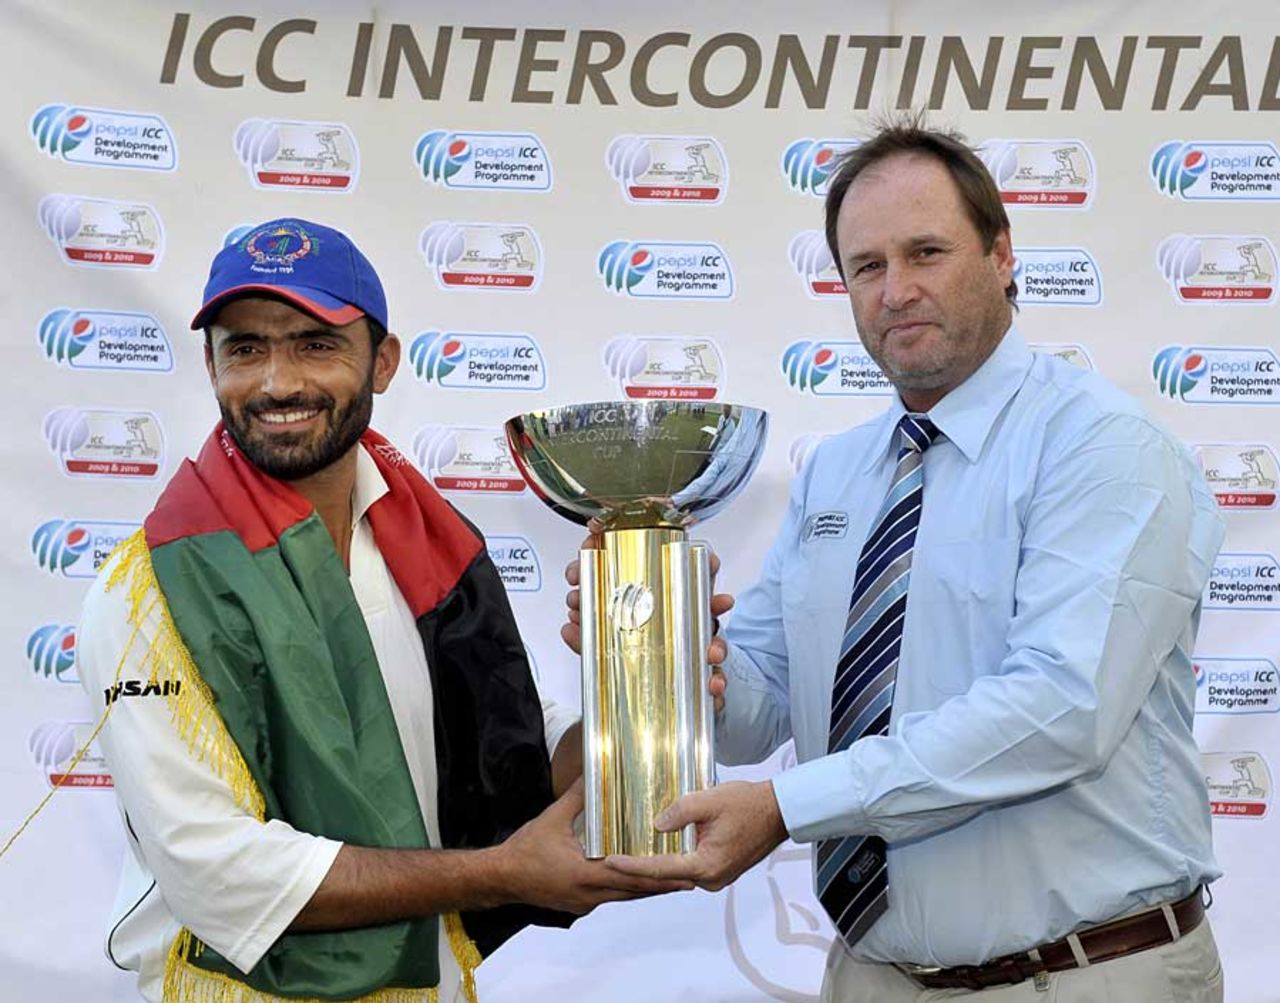 Nawroz Mangal is handed the trophy by ICC's Richard Done, Afghanistan v Scotland, ICC Intercontinental Cup final, Dubai, December 4, 2010